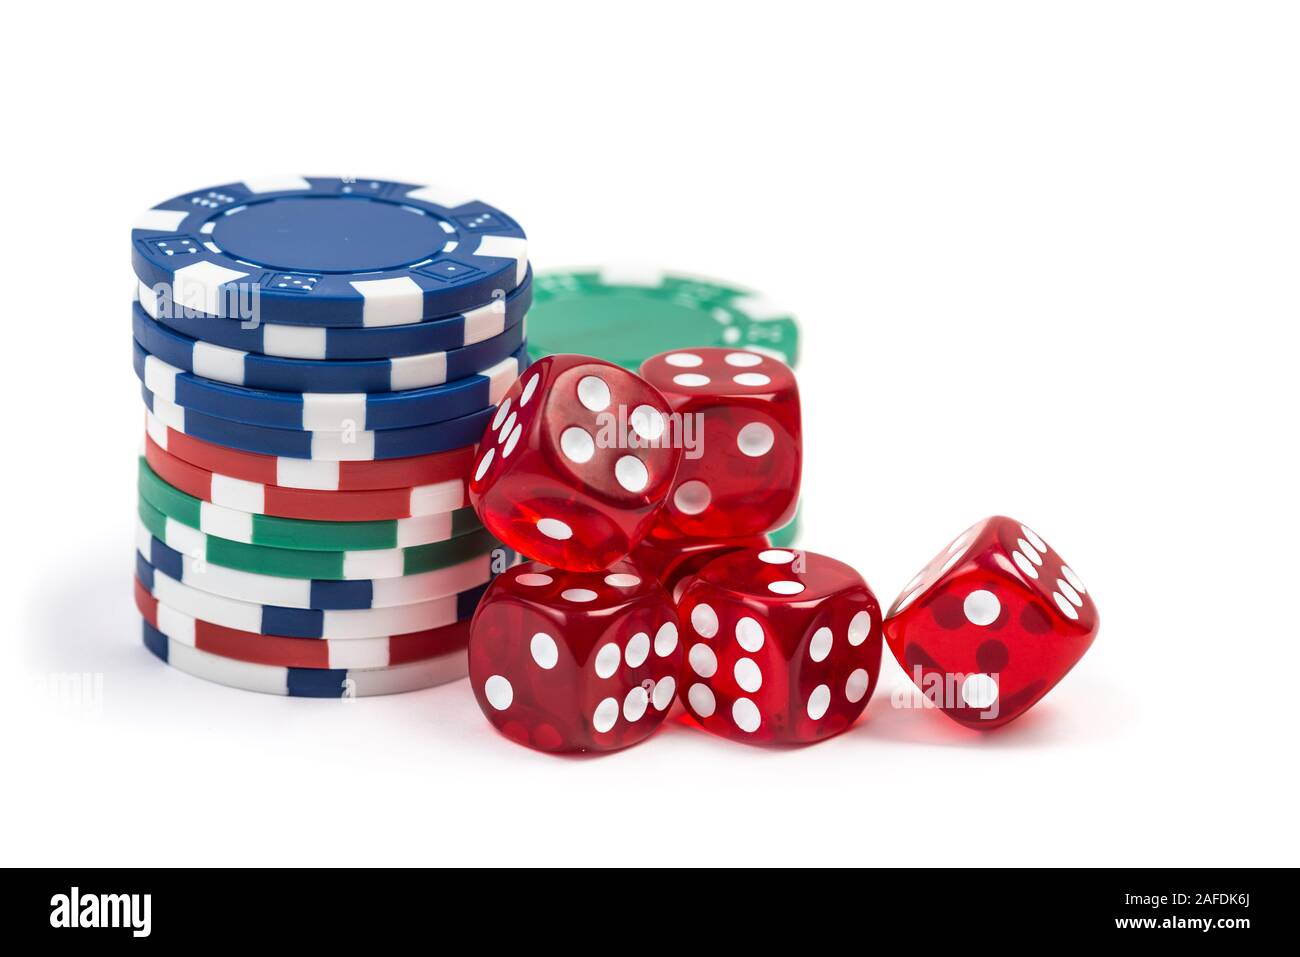 Group of red gambling casino dice and chips isolated on white background Stock Photo